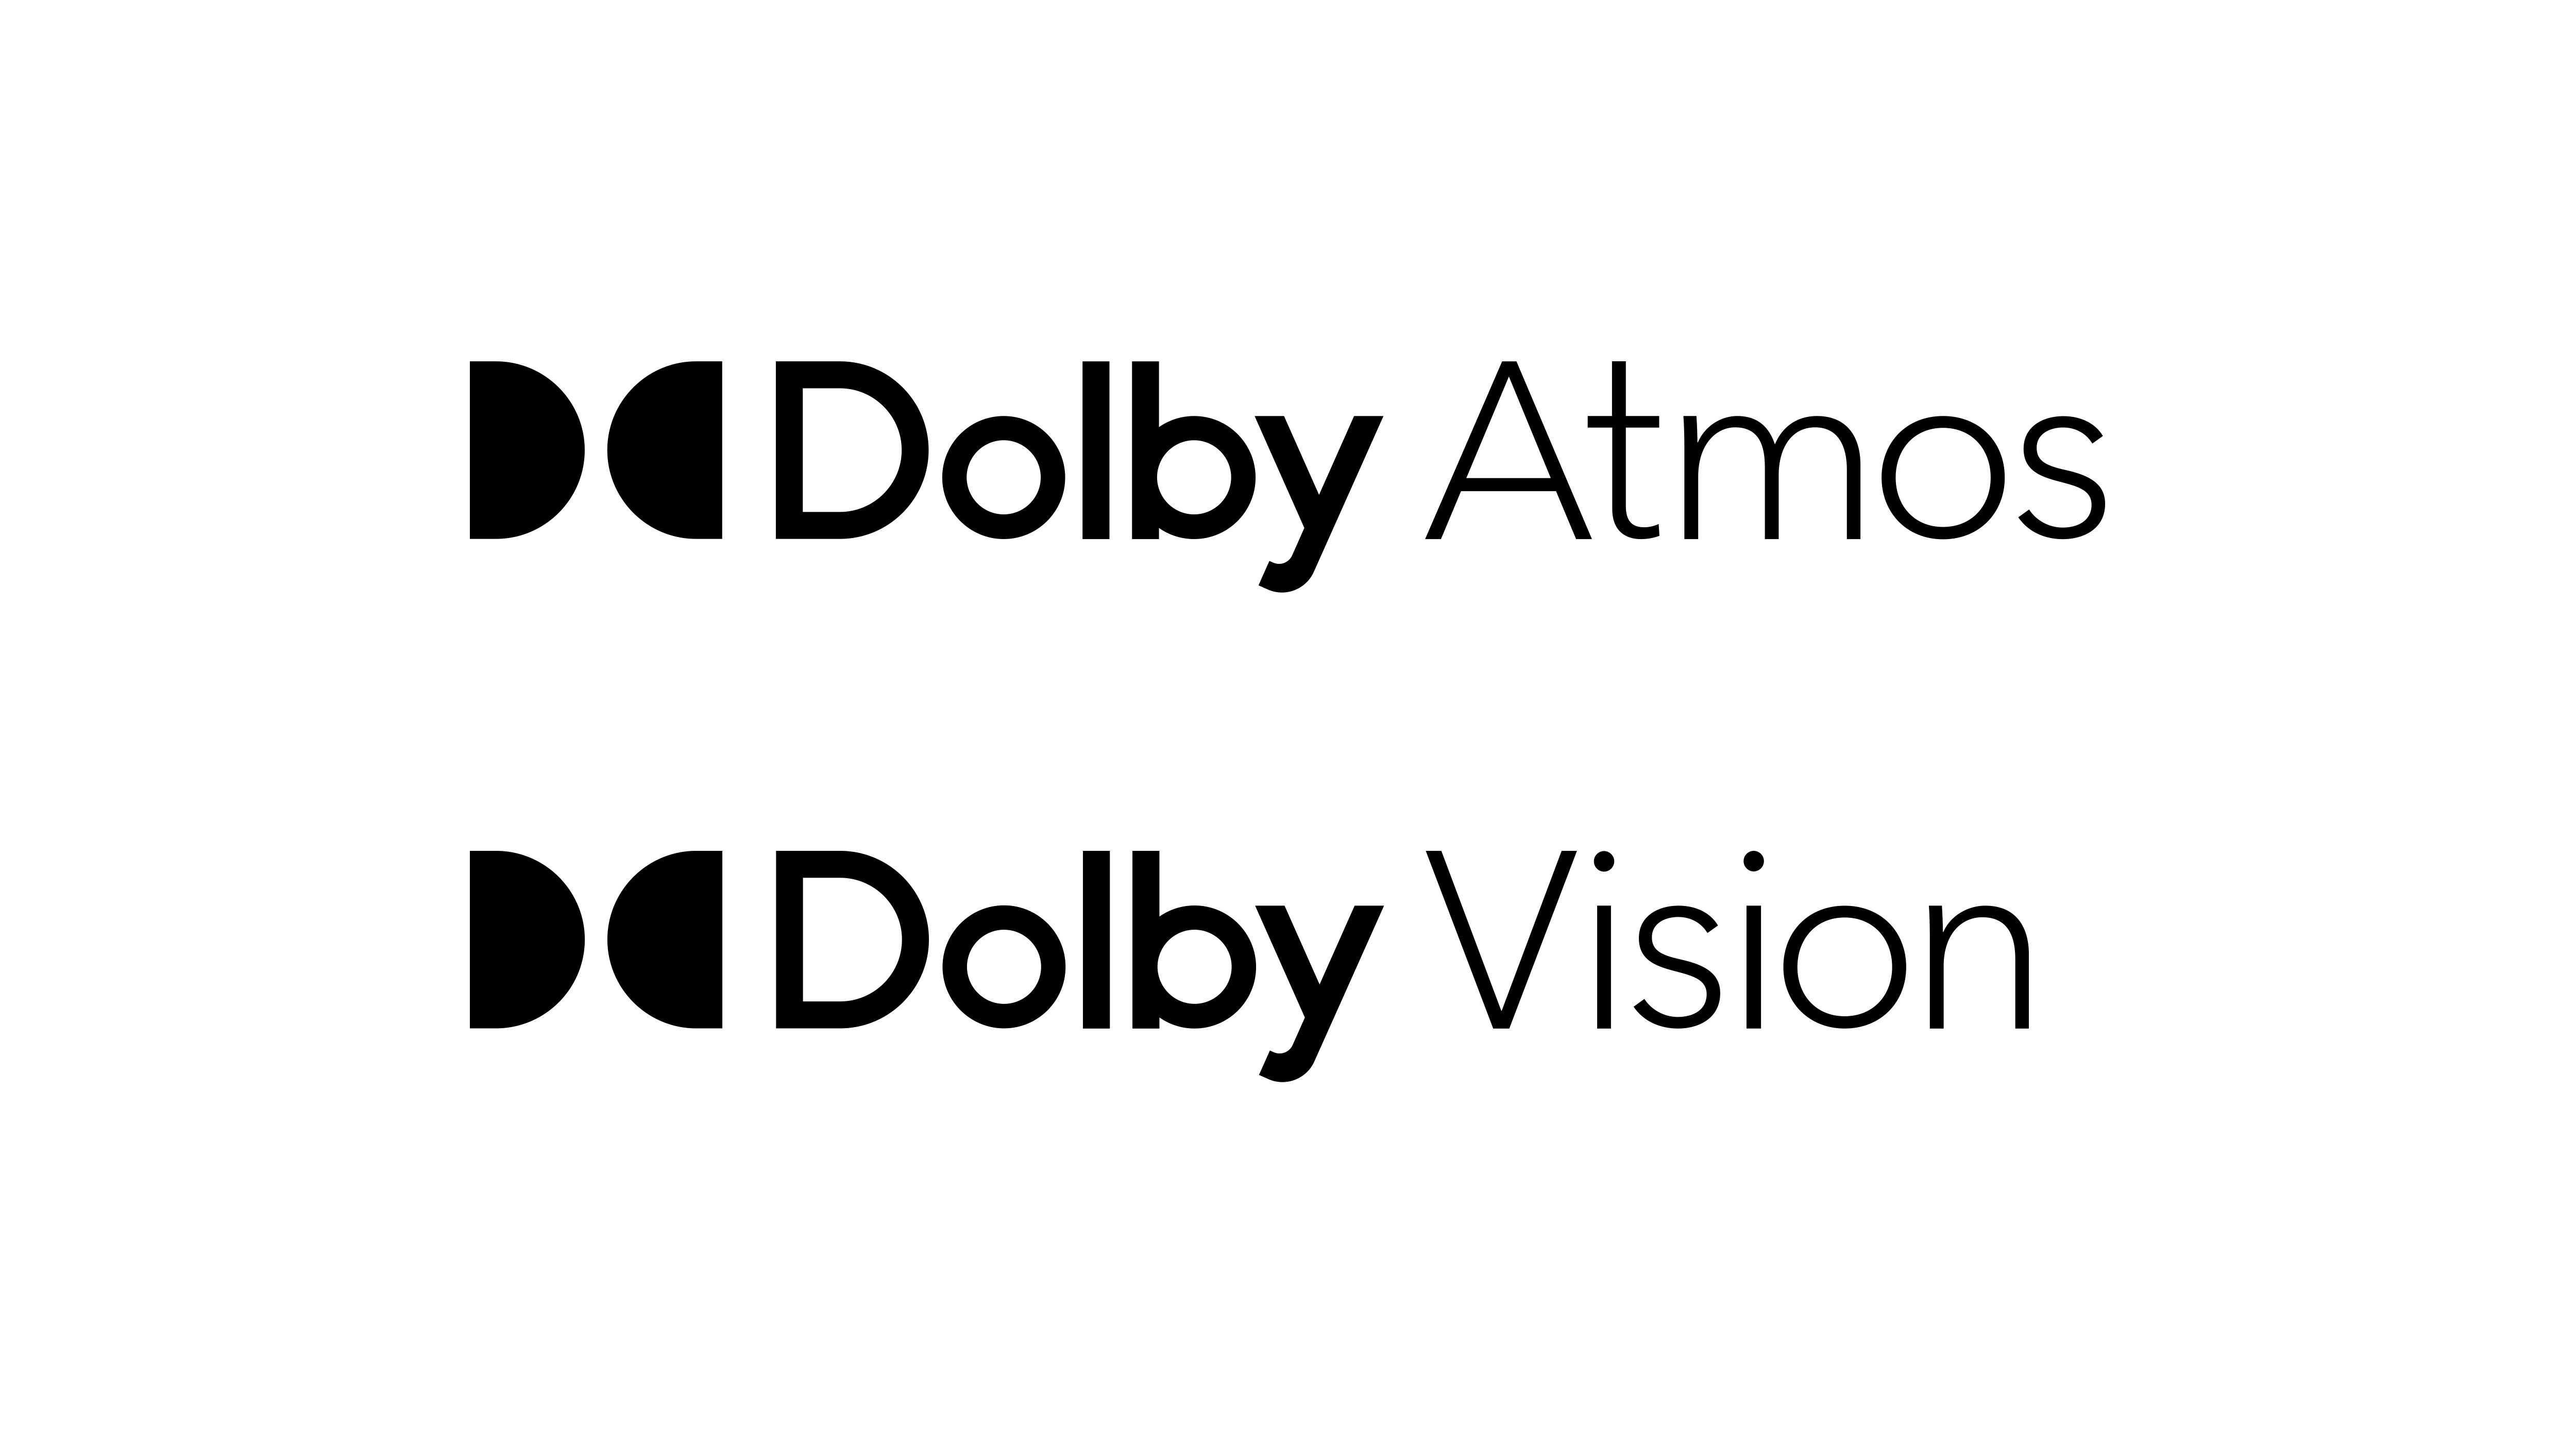 laptop-inspiron-dolby-vision-atmos-icon.psd